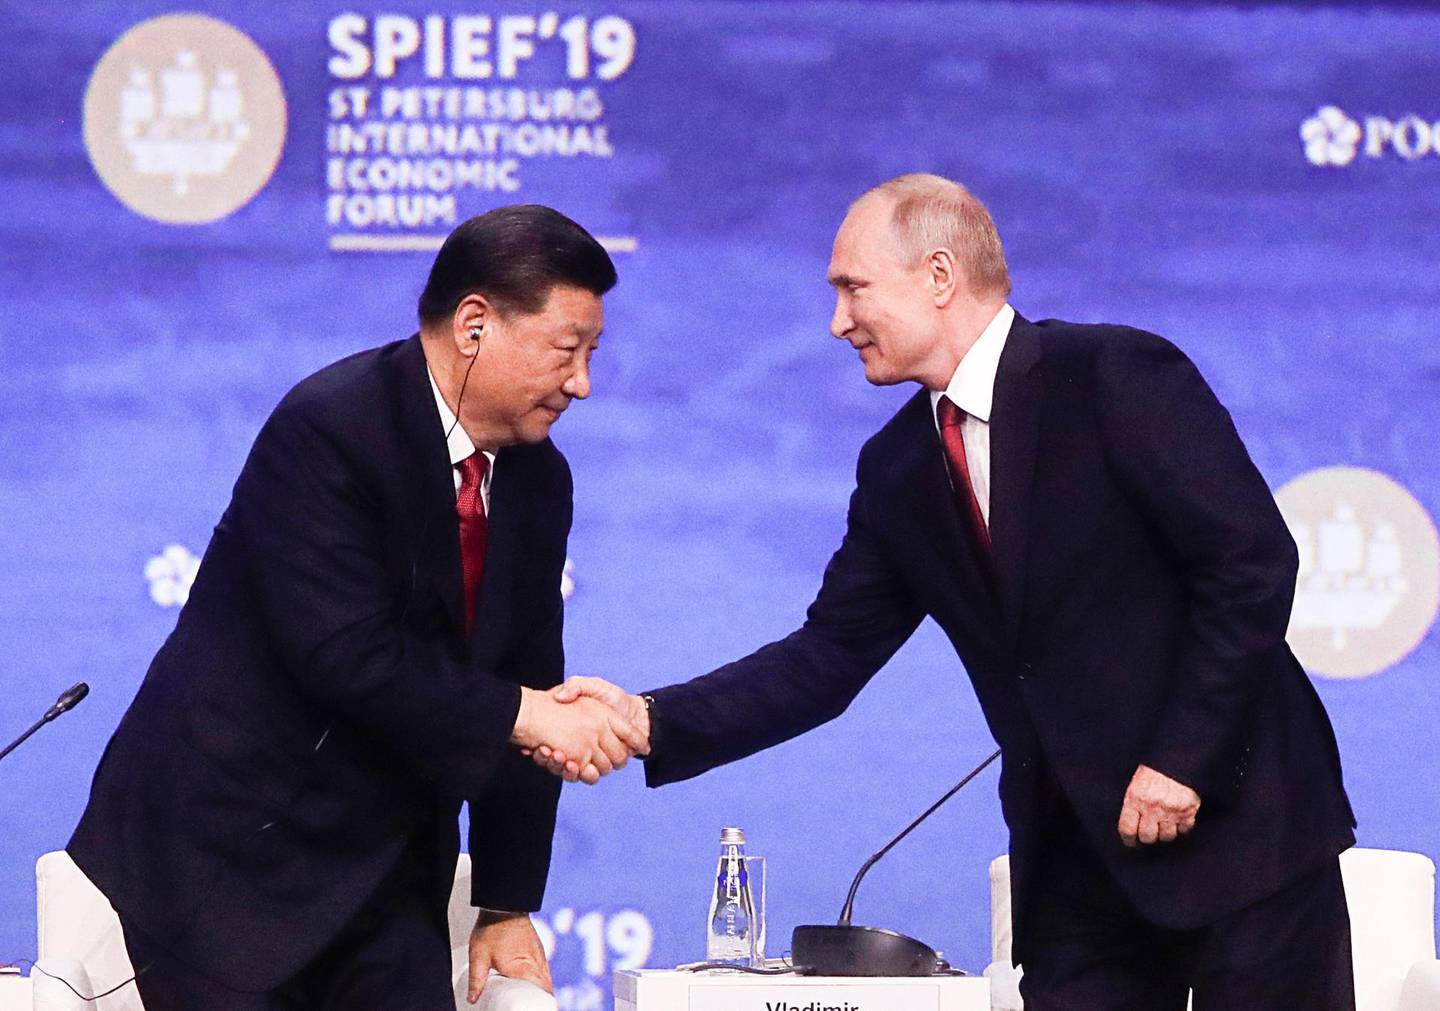 Russian President Vladimir Putin, right, shakes hands with Chinese President Xi Jinping at the St. Petersburg International Economic Forum in St. Petersburg, Russia, Friday, June 7, 2019. (Mikhail Metzel/TASS News Agency Pool Photo via AP)